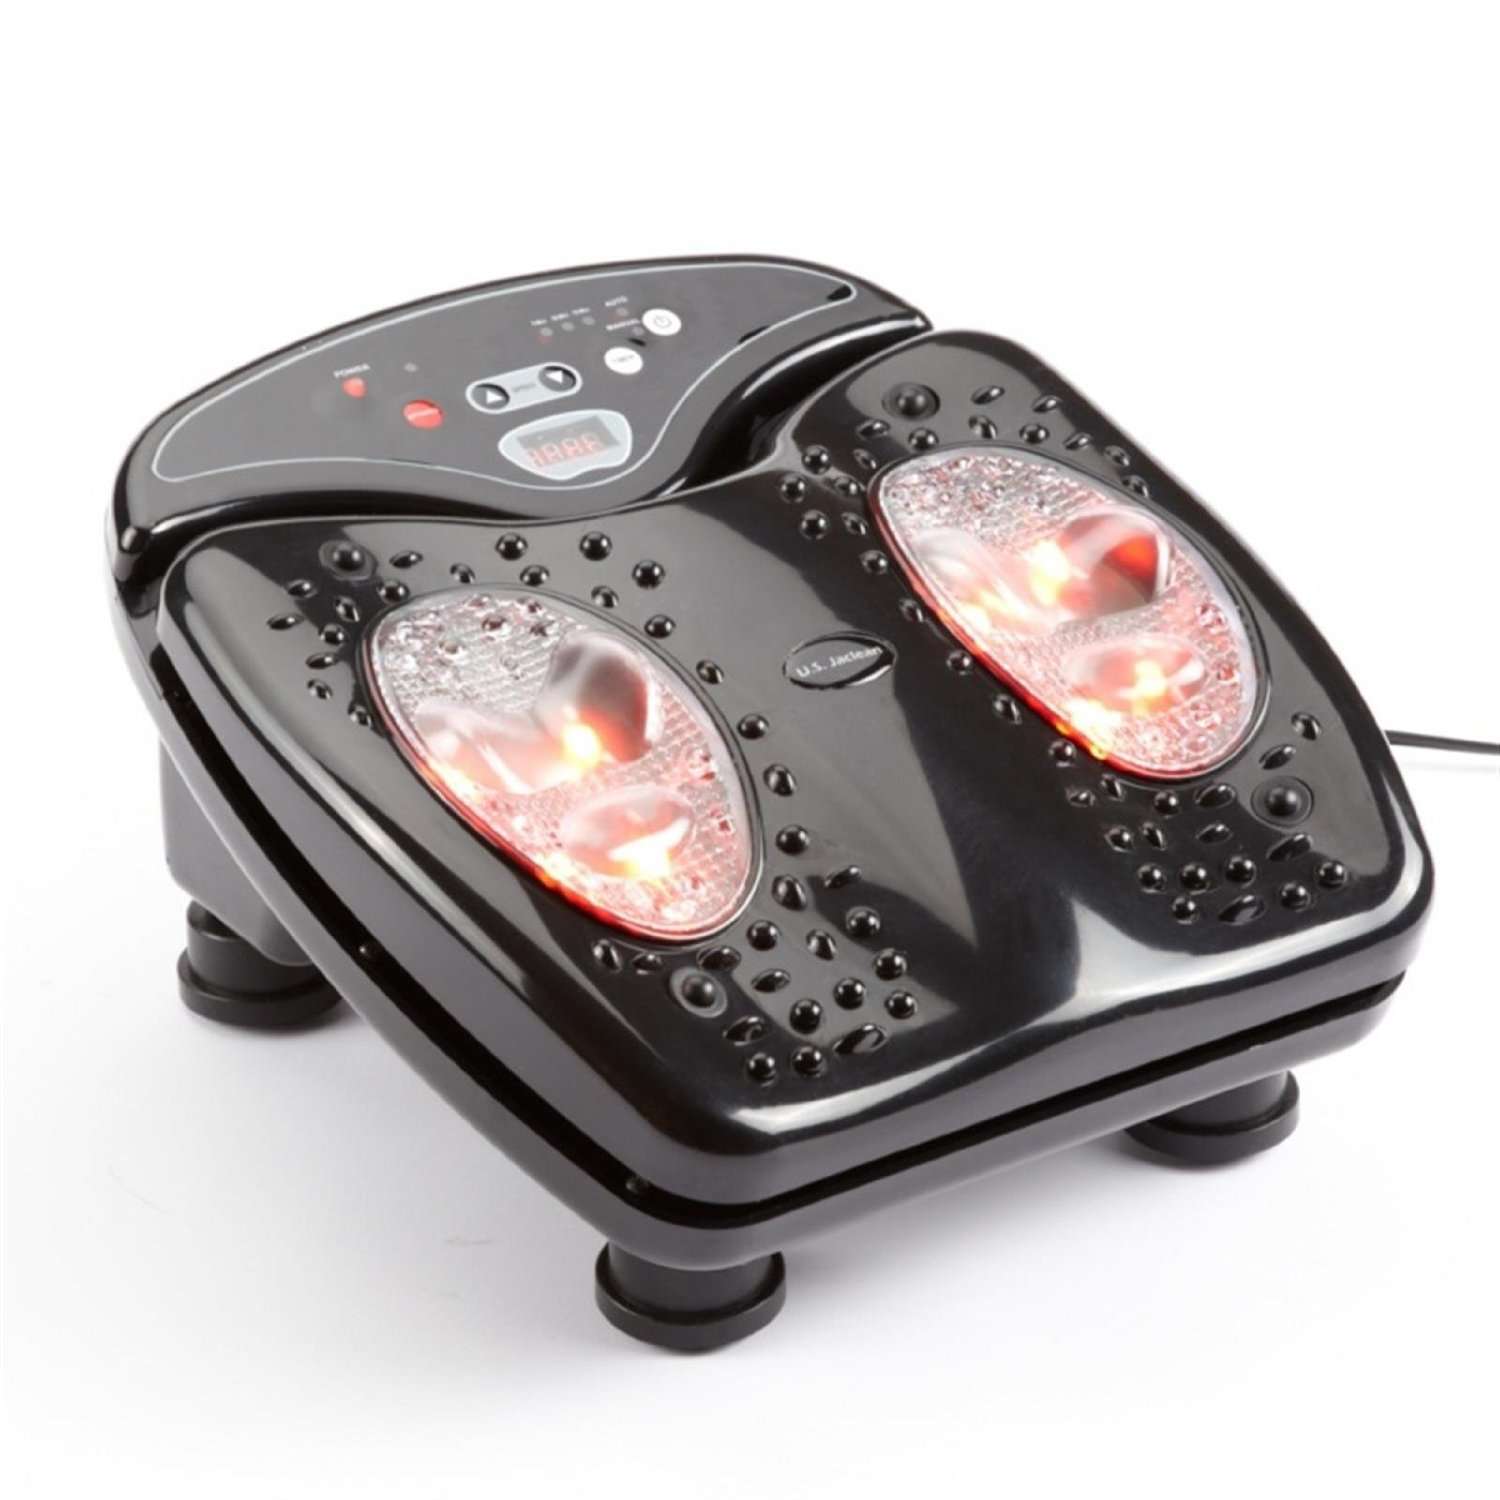 Top Rated Foot Massagers: Foot Vibe Vibration Massager Review